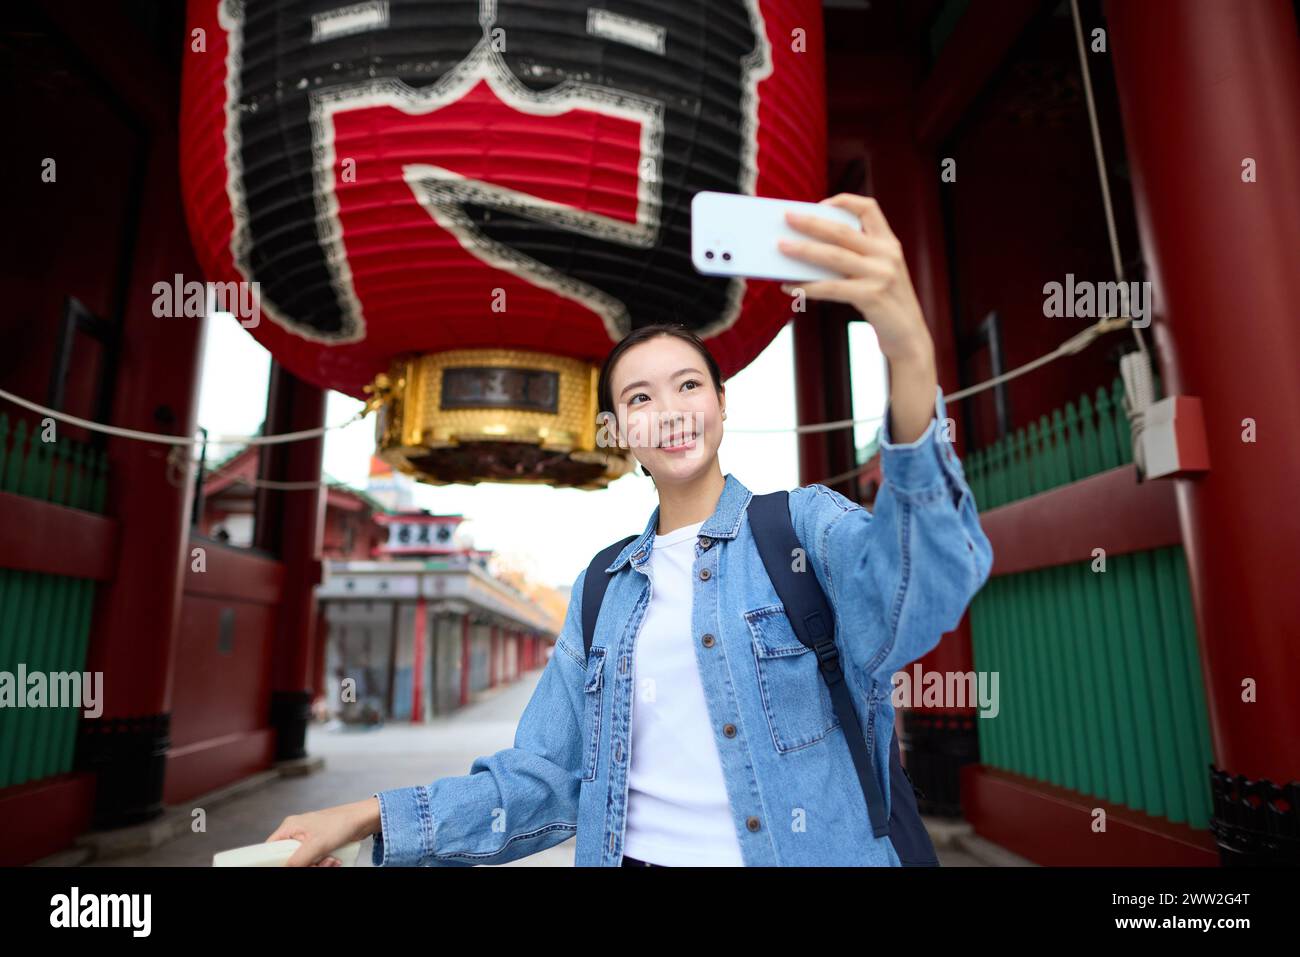 A woman taking a selfie with a camera in front of a red lantern Stock Photo